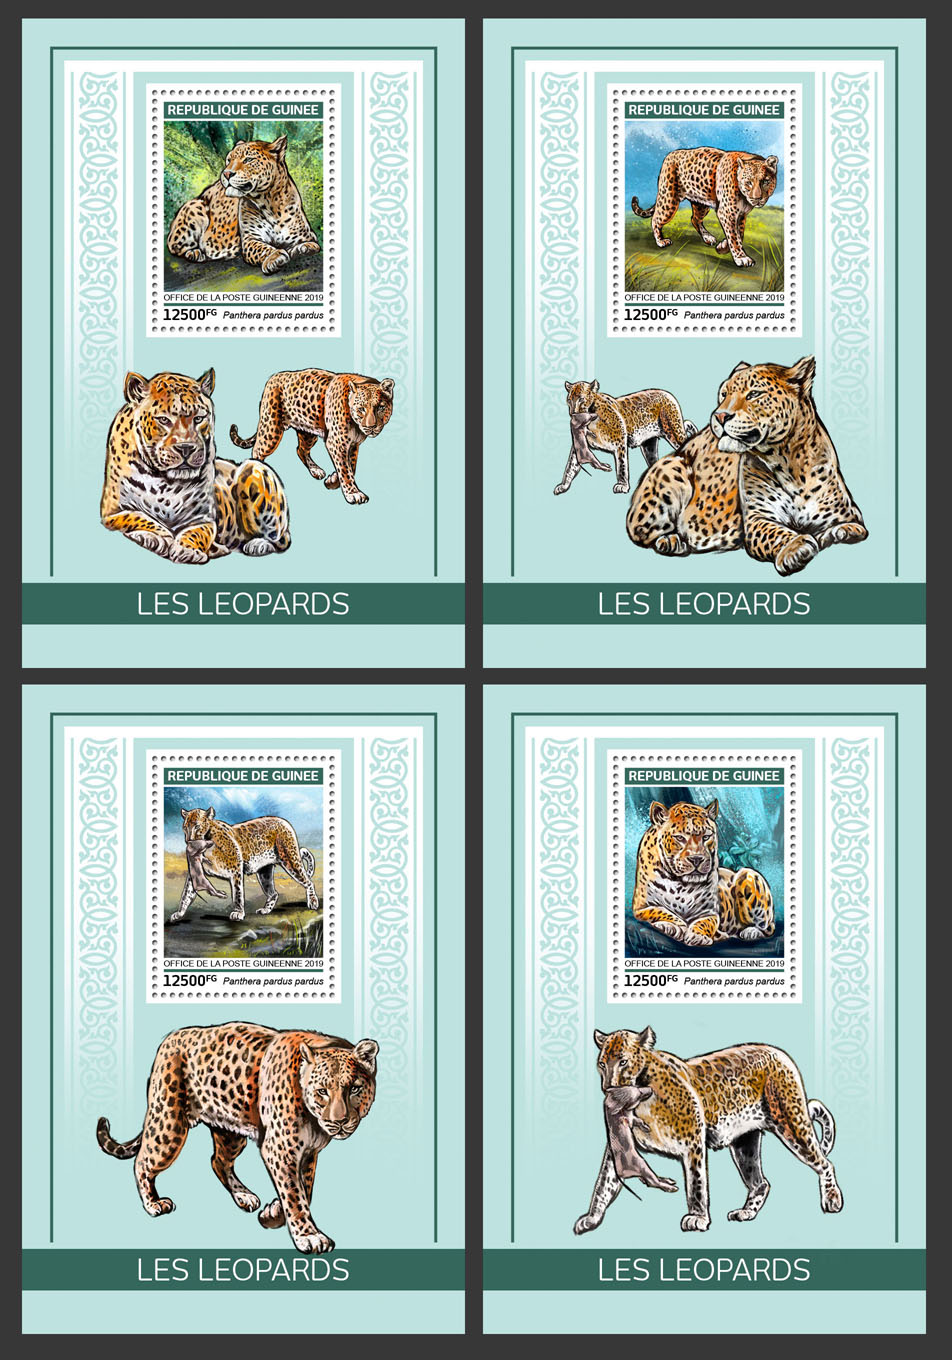 Leopards - Issue of Guinée postage stamps